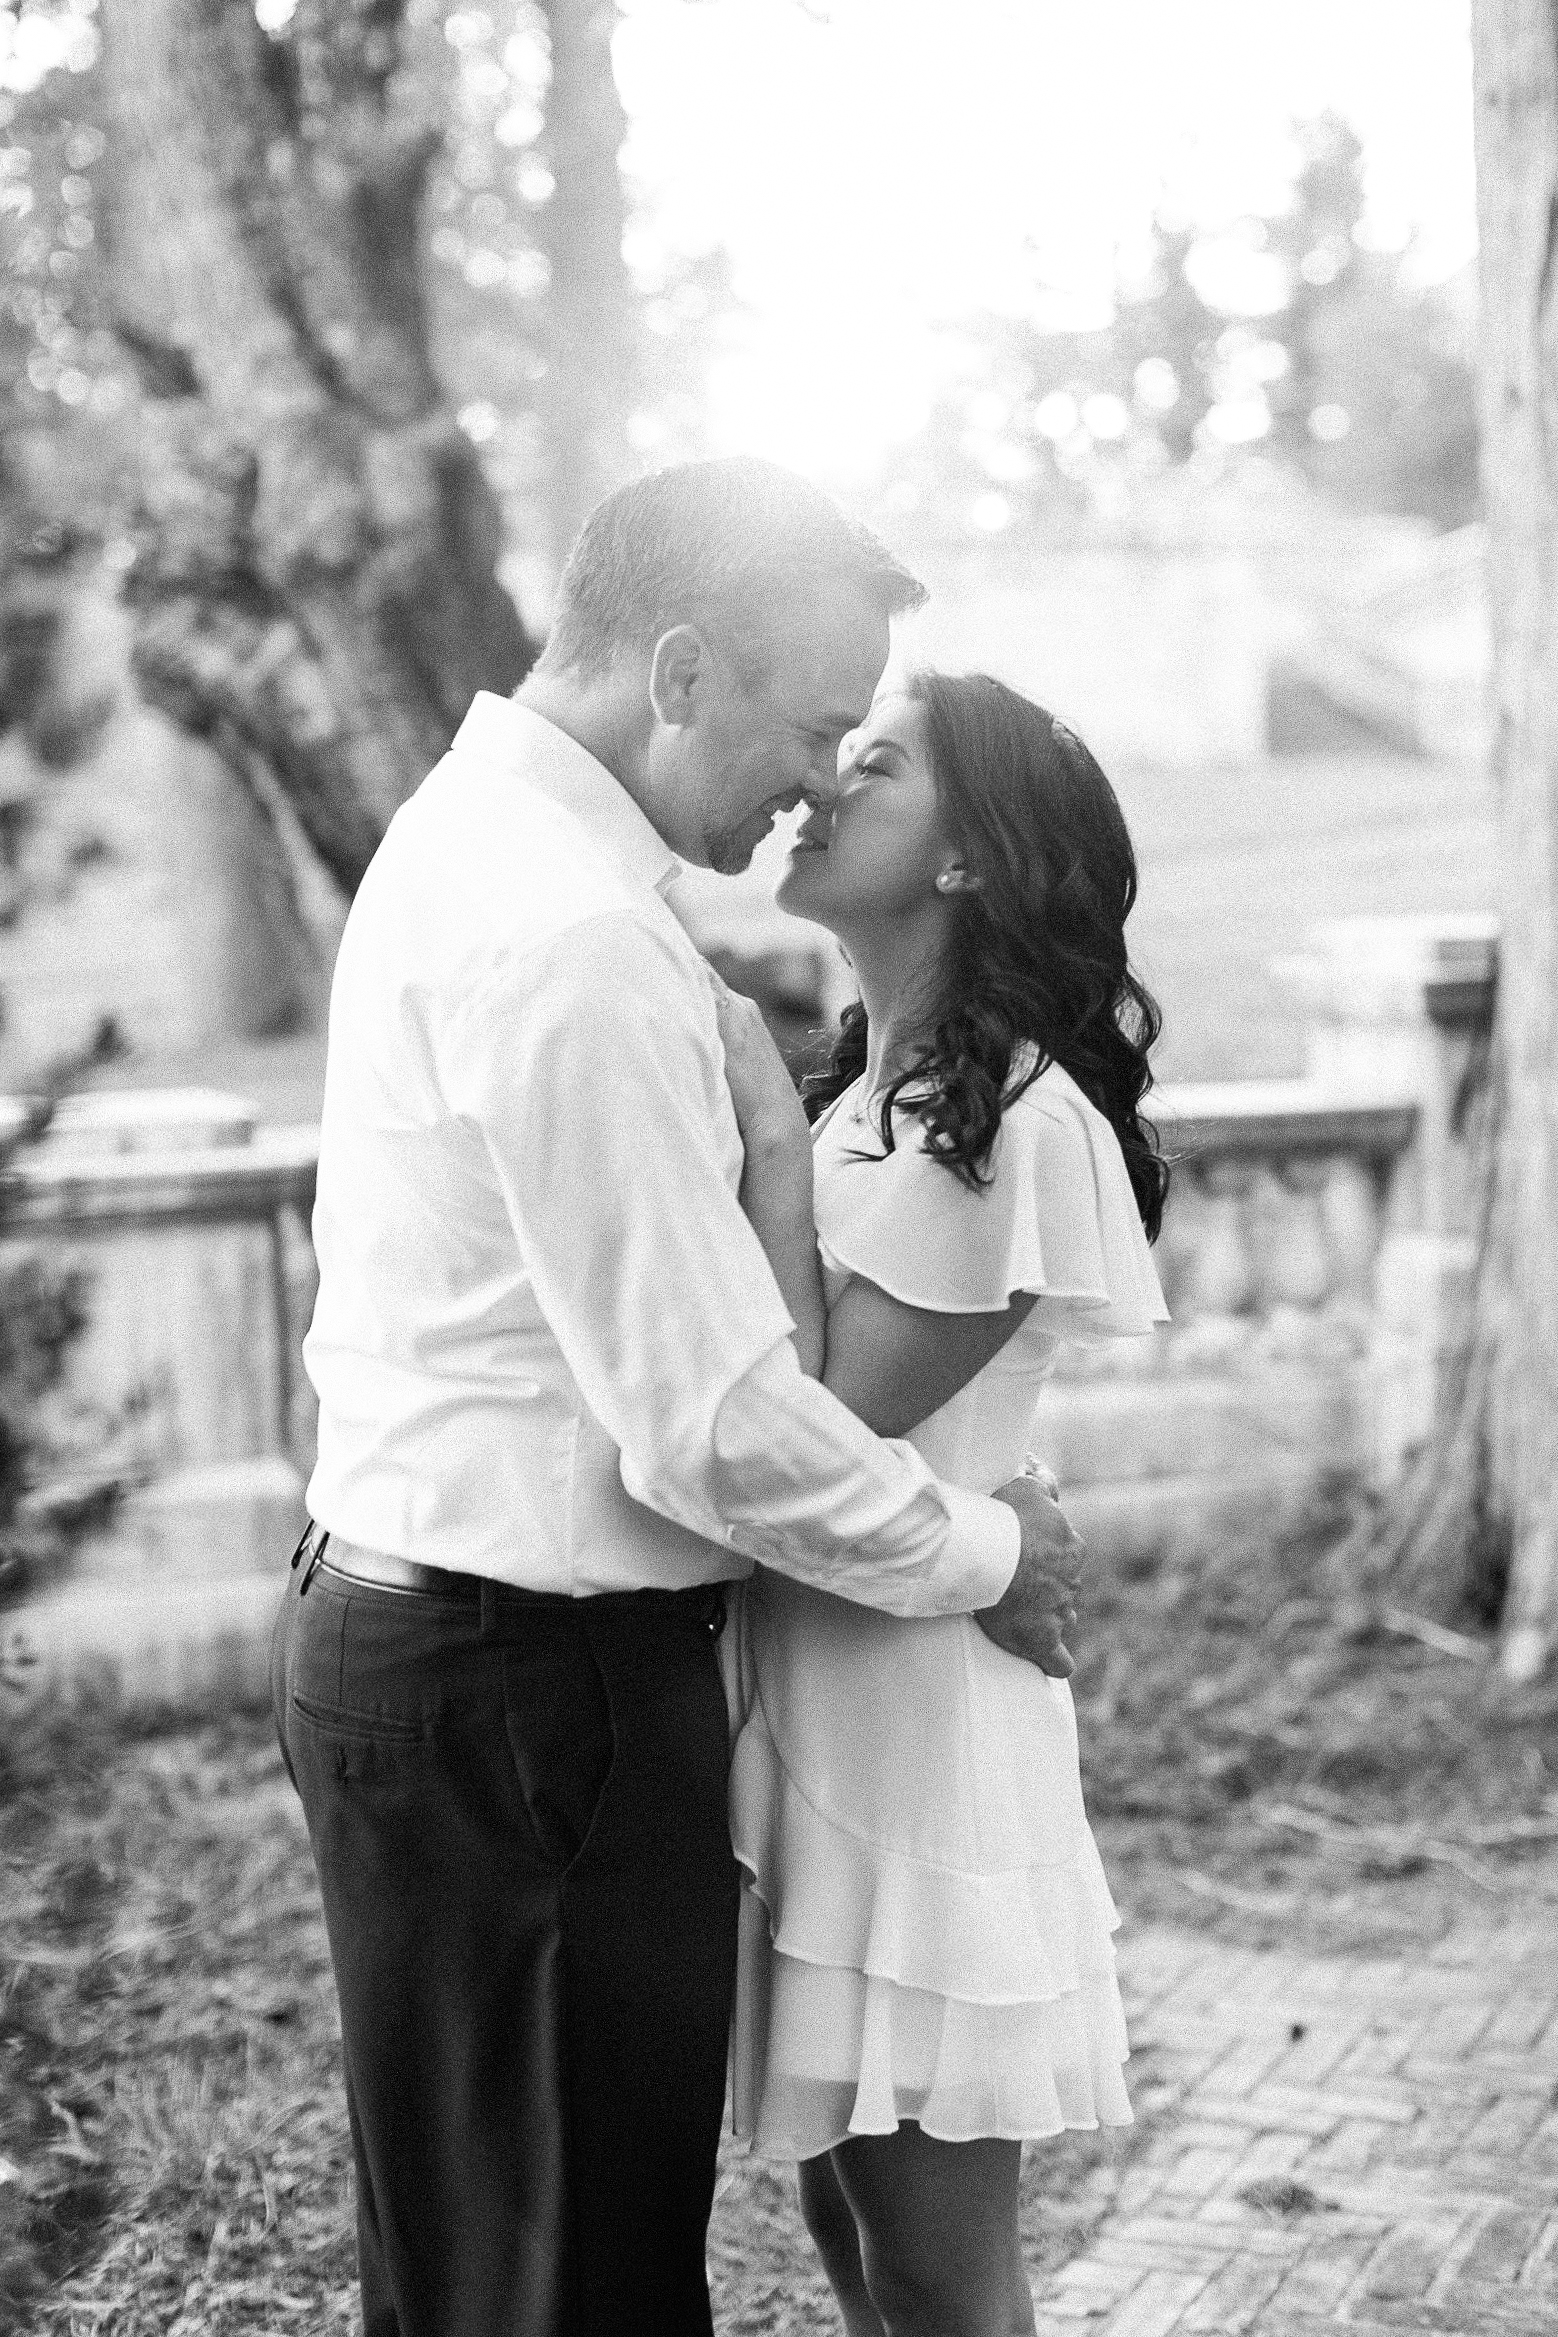 Romantic black and white engagement session photography at Swannanoa Palace